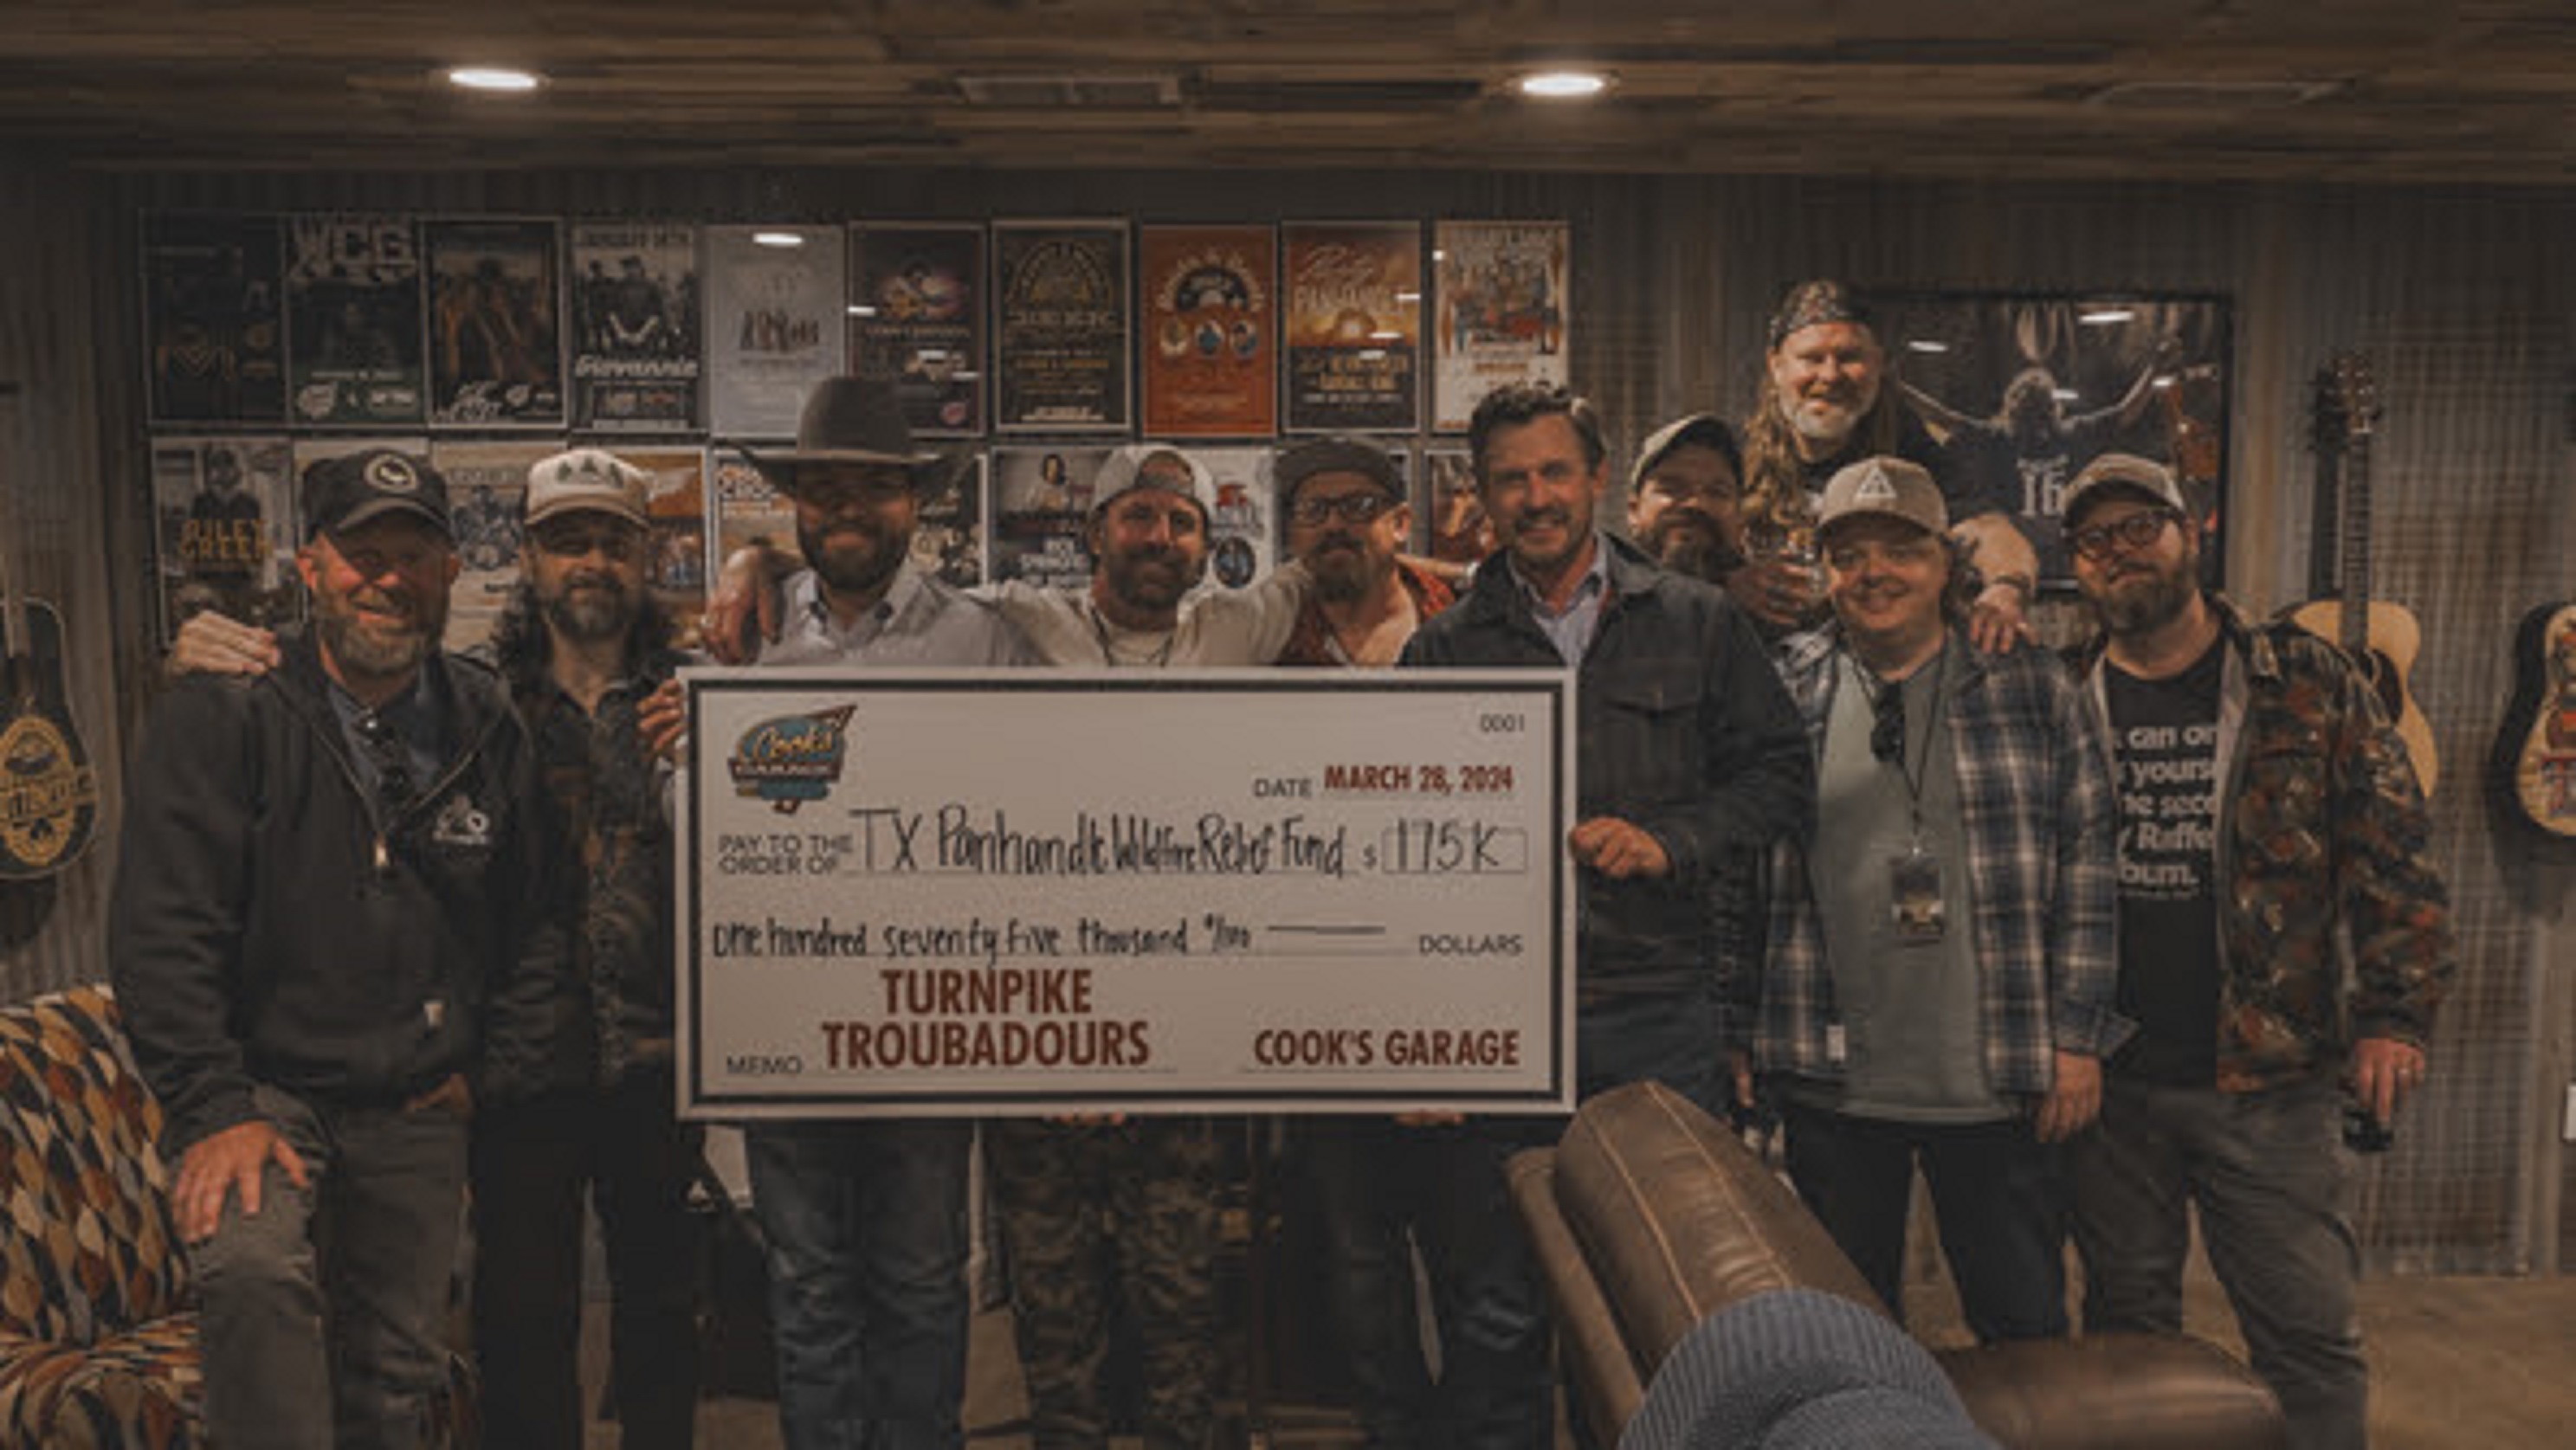 Turnpike Troubadours raise $175,000 for The Texas Panhandle Wildfire Relief Fund